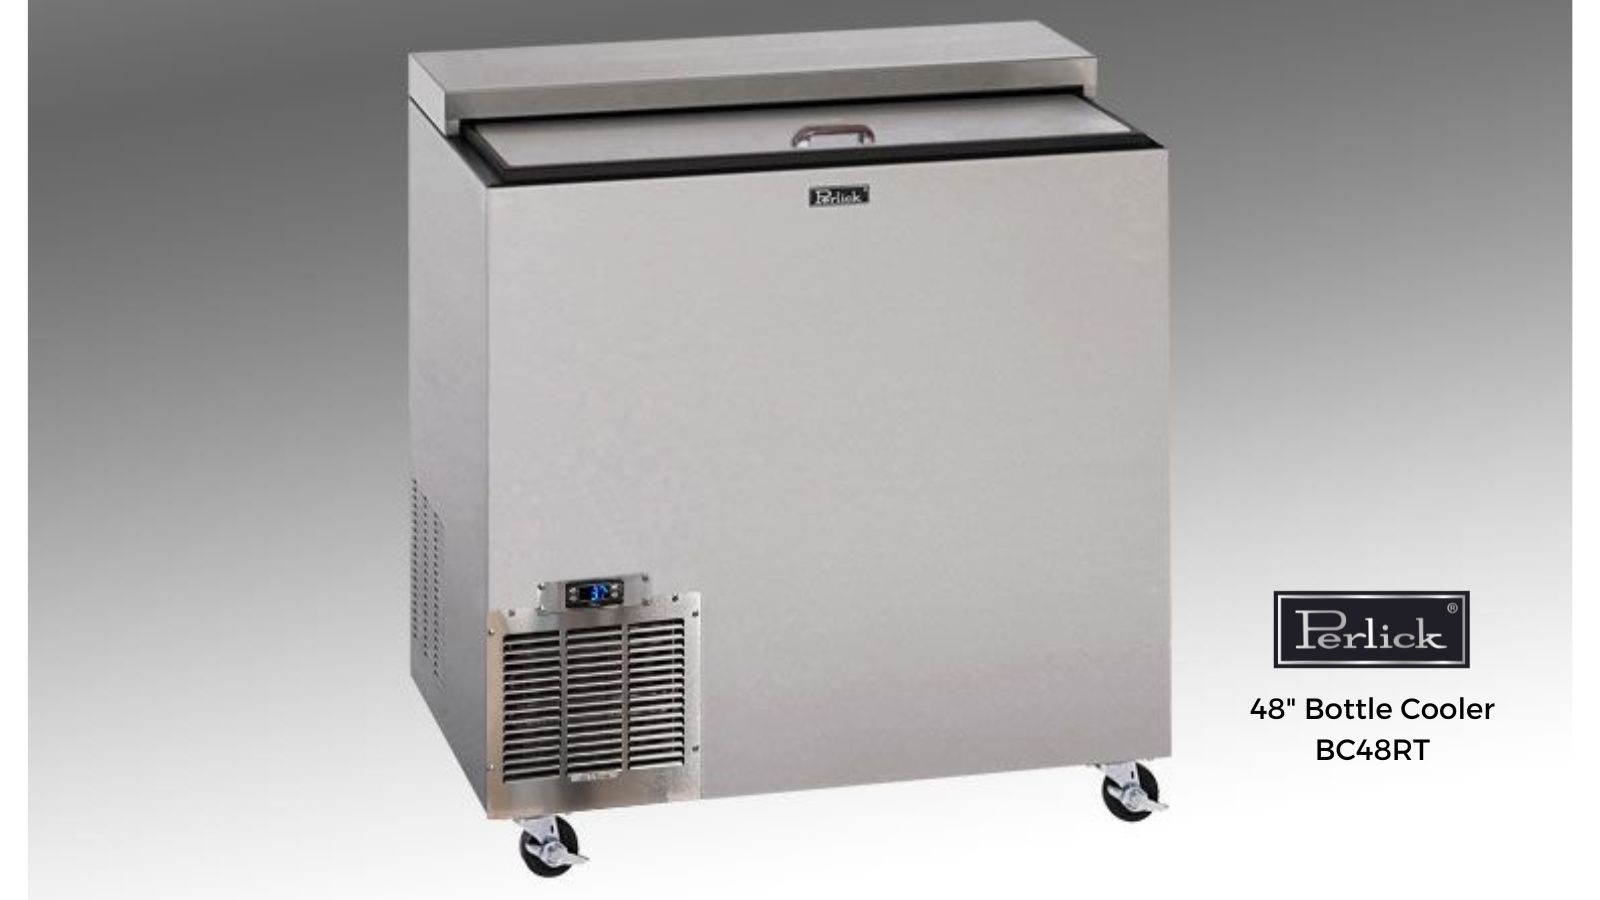 Perlick 48" Bottle Cooler Heavy duty construction - stainless steel interior & top